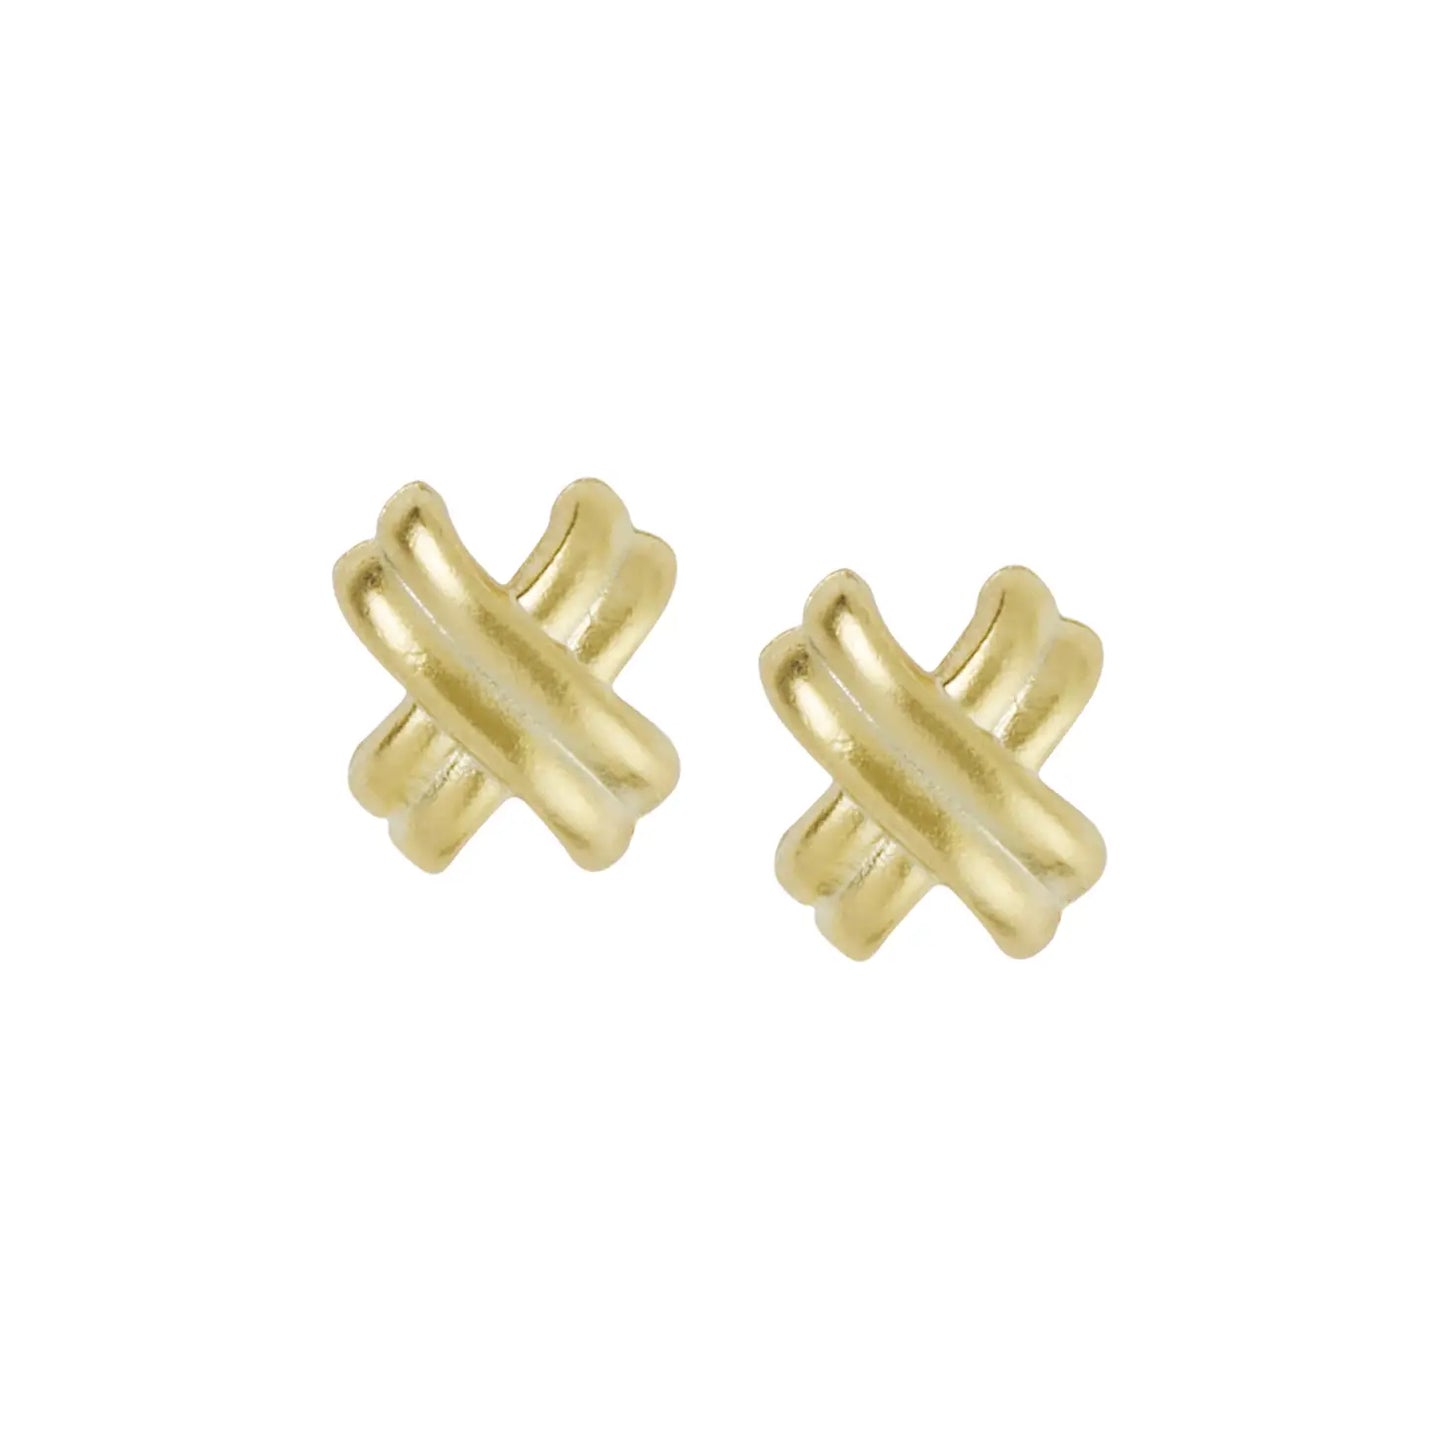 Susan Shaw Gold Small Texas X's Earrings